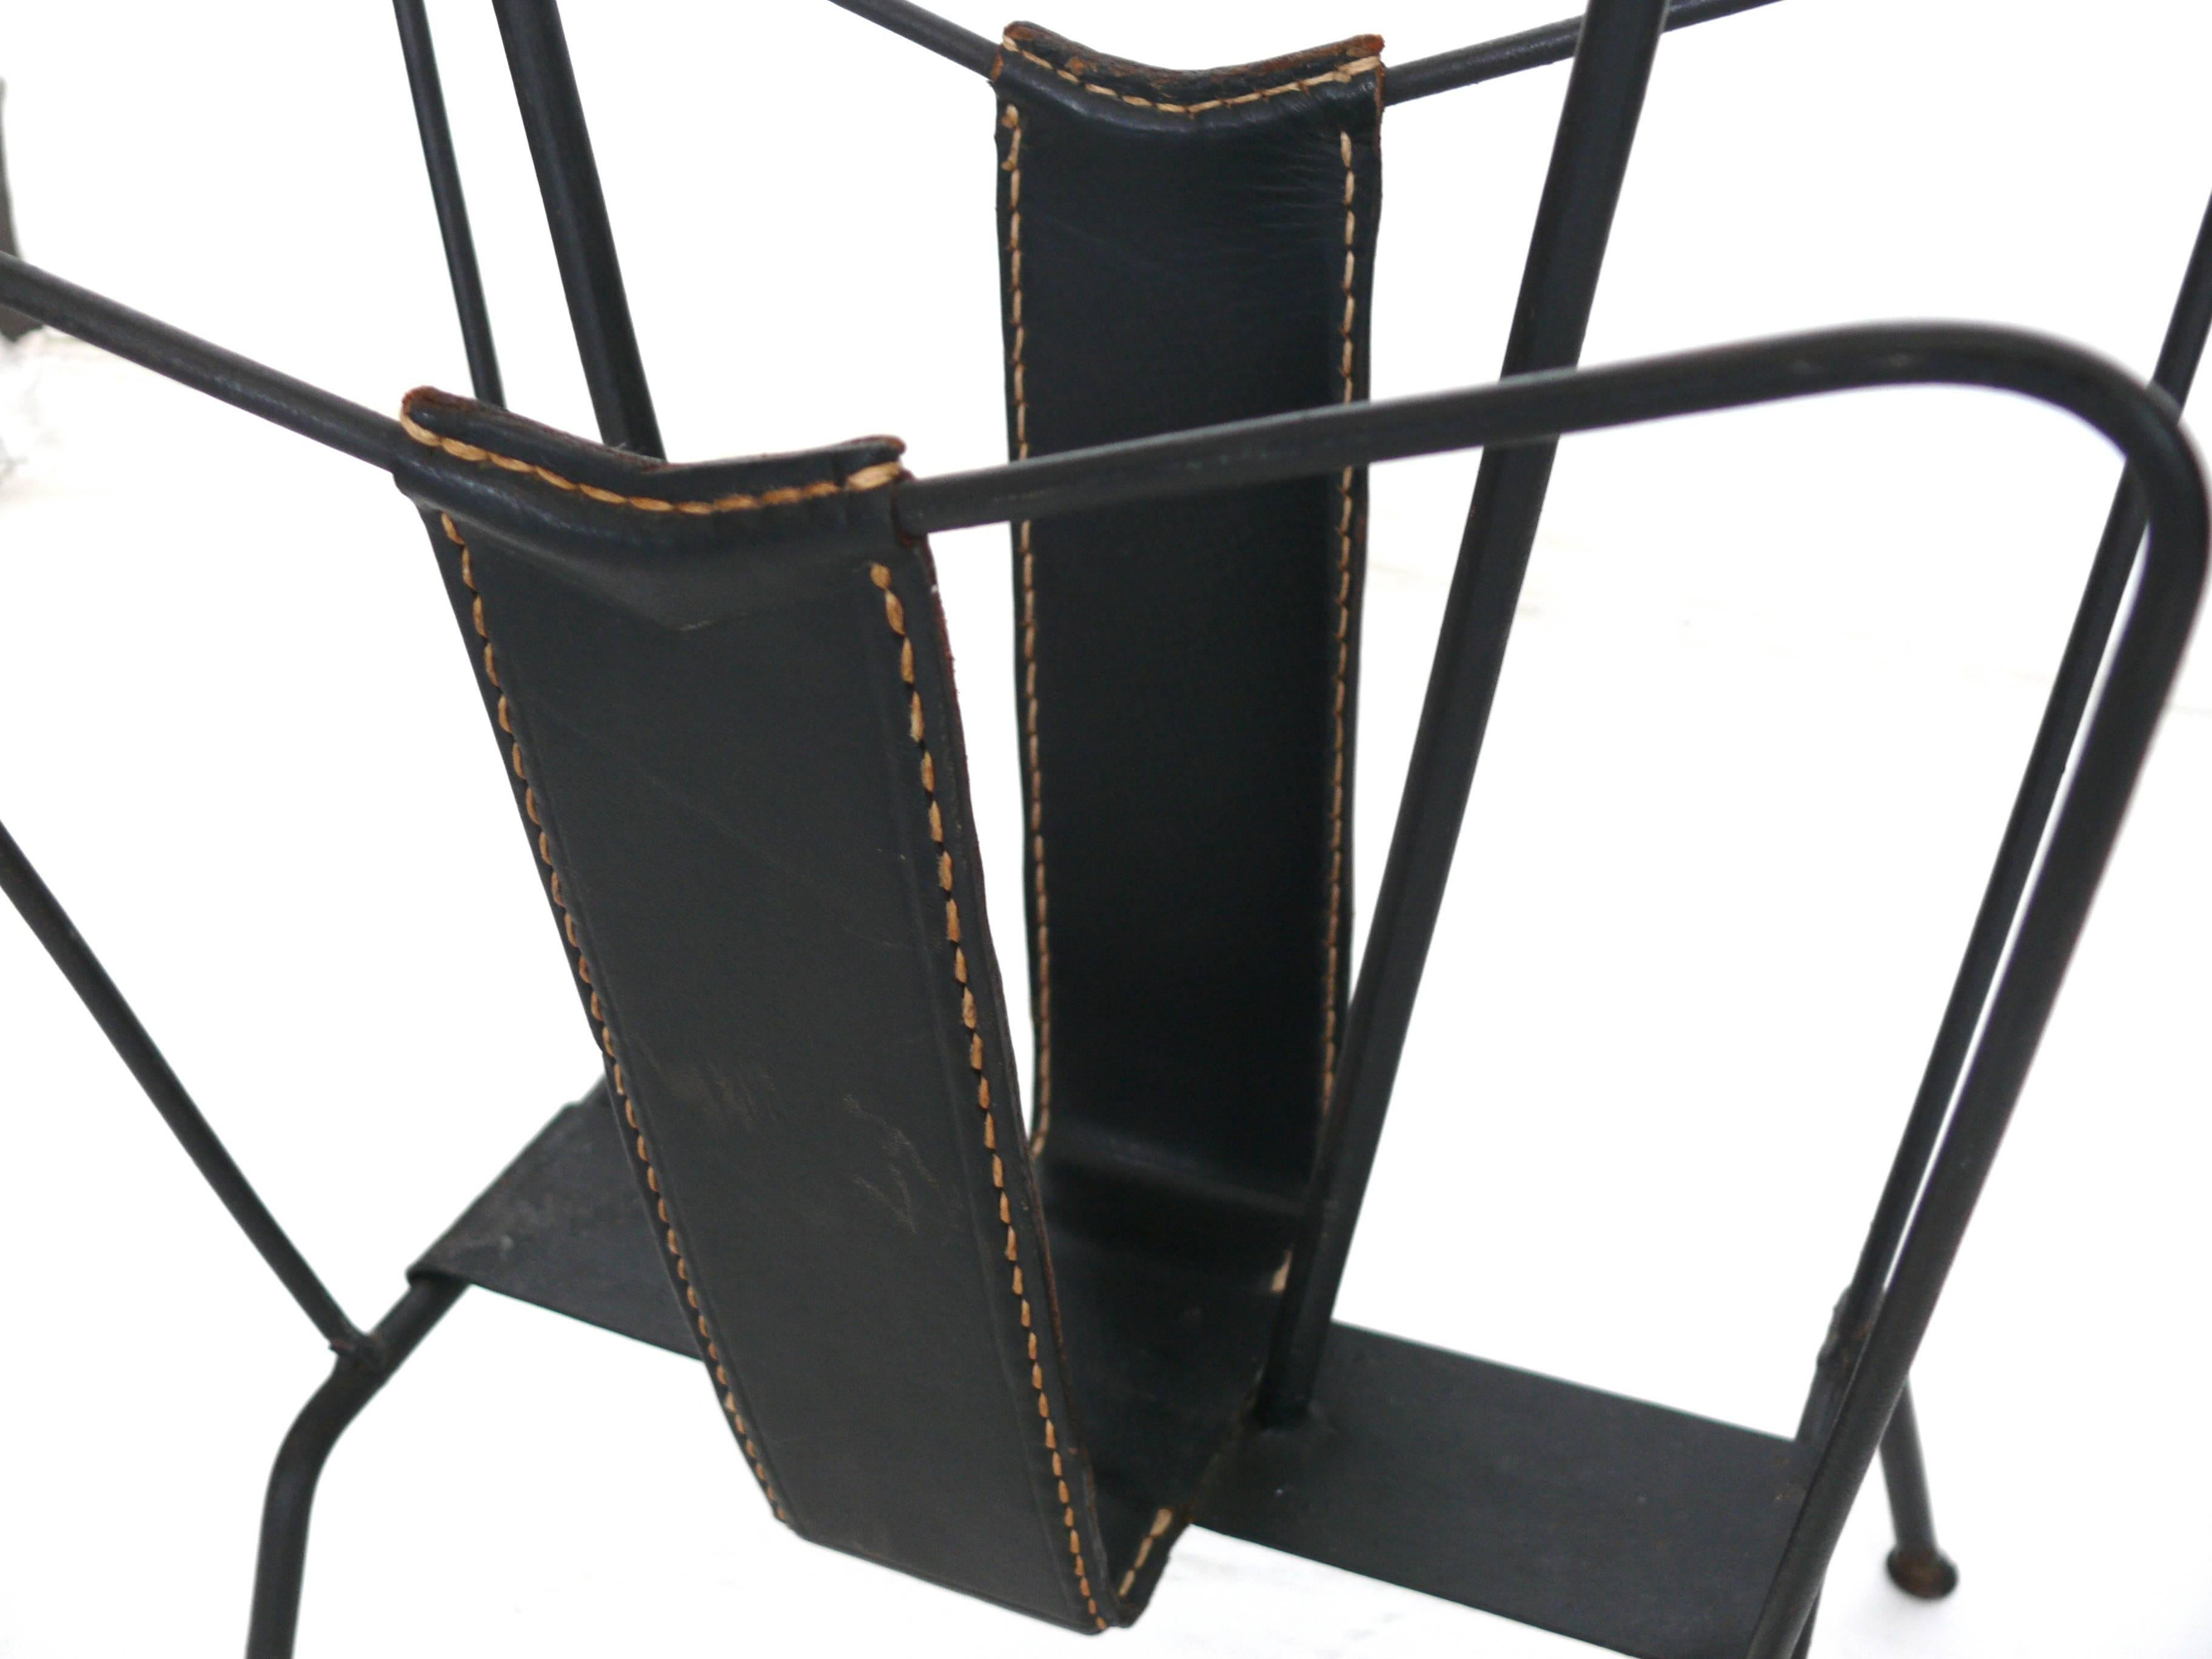 Handsome magazine rack by Jacques Adnet in black leather with contrast stitching.  Very good vintage condition.